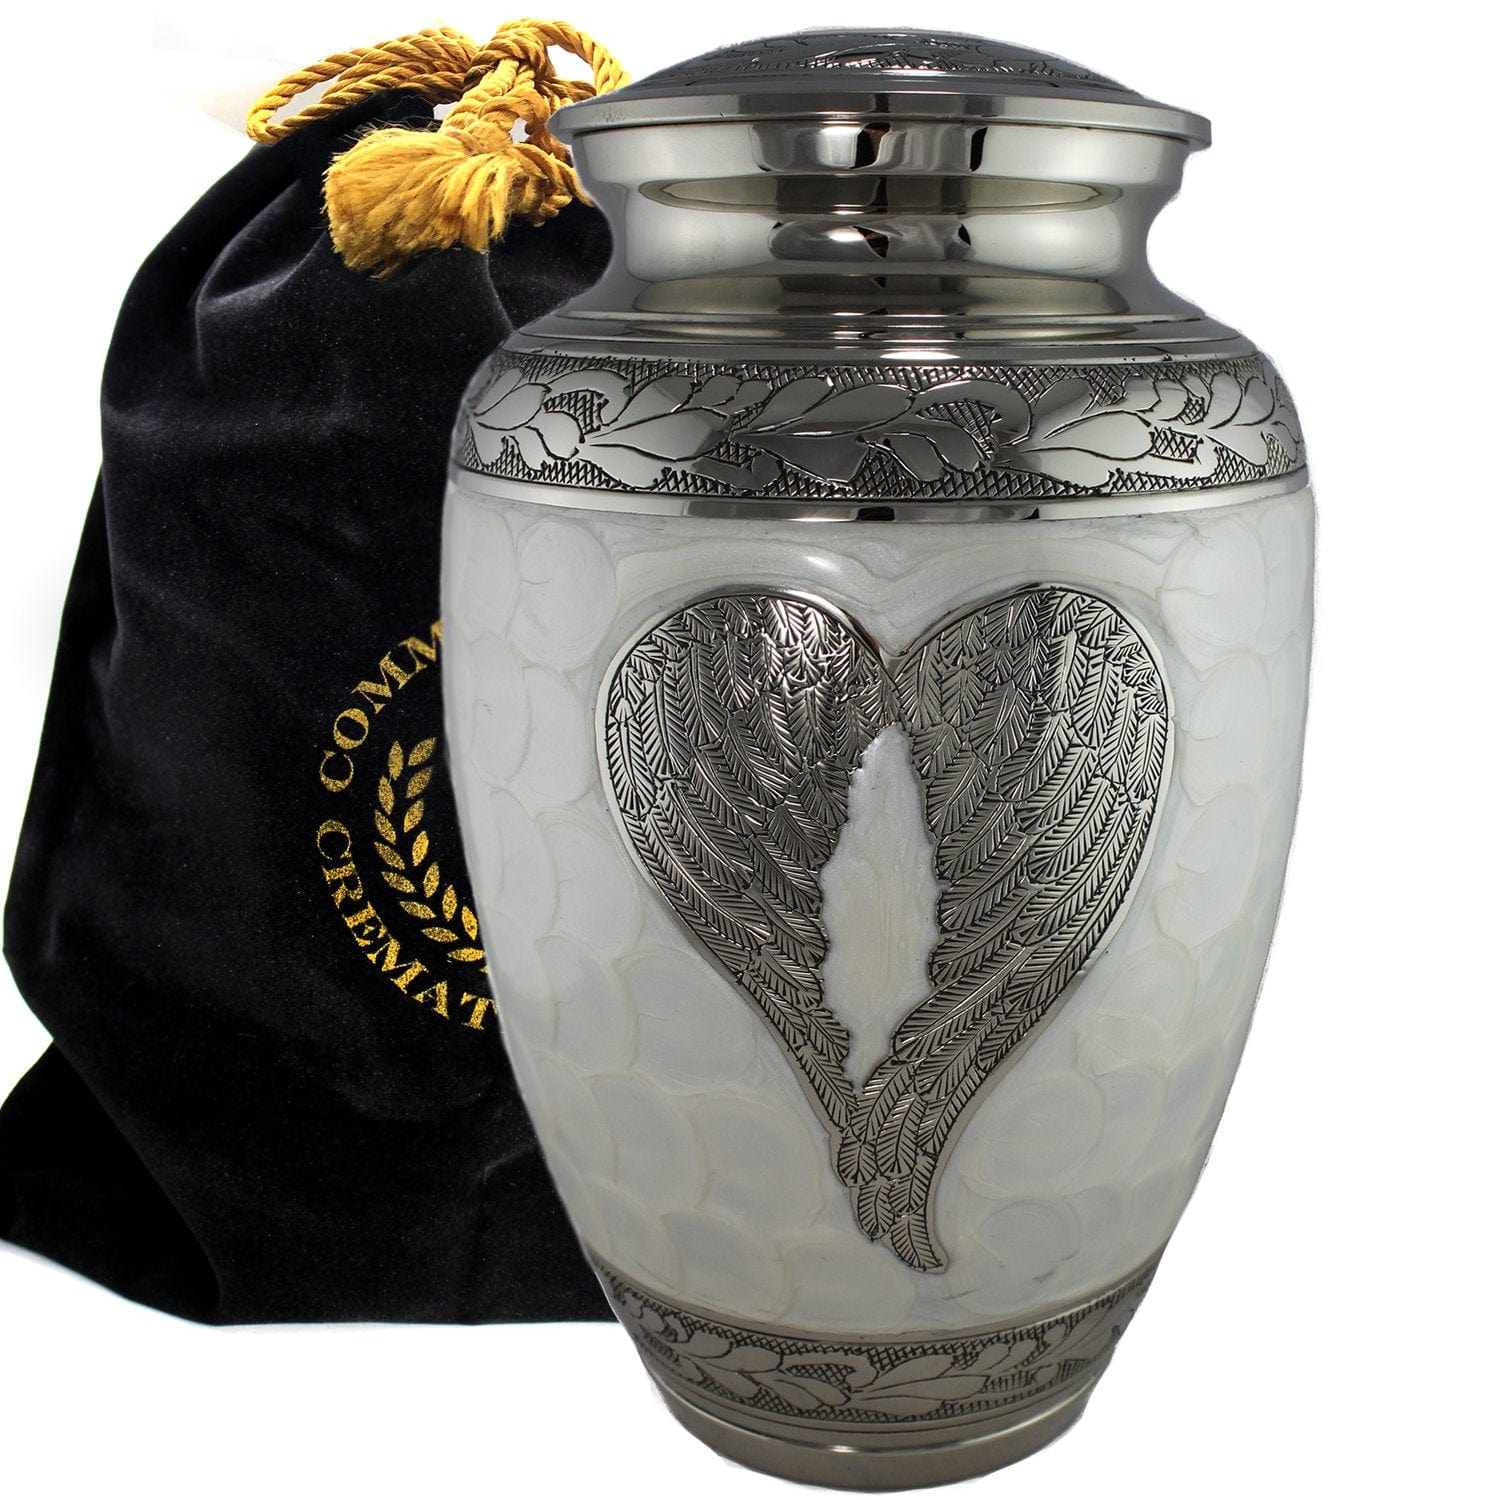 Commemorative Cremation Urns Home & Garden Large Loving Angel Wings - White Cremation Urn